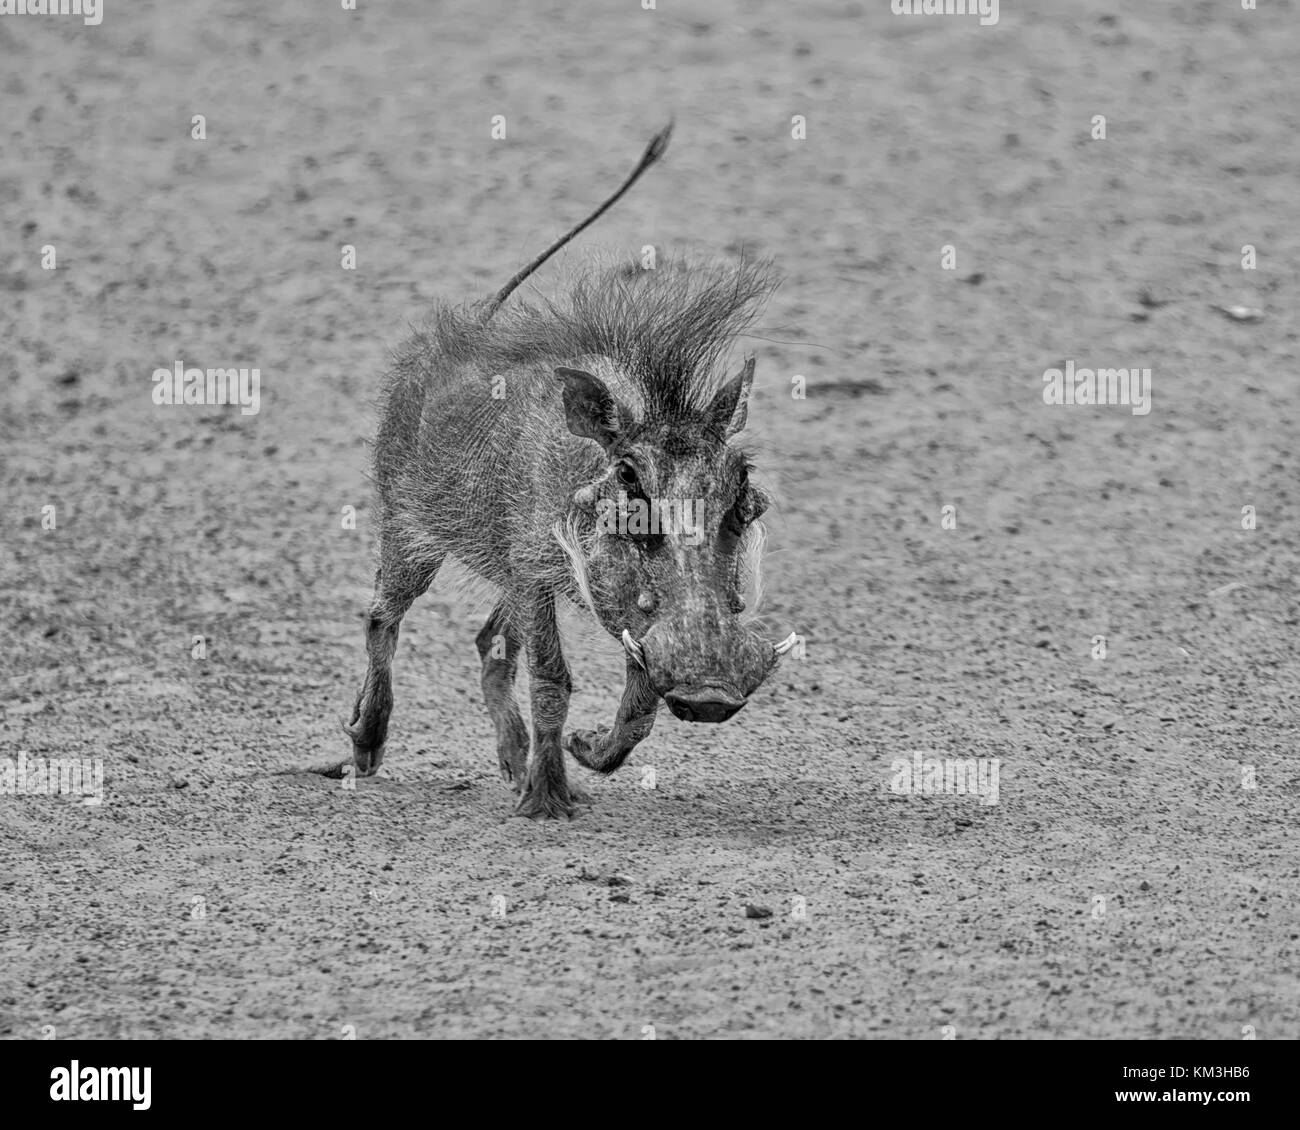 A young Warthog in Southern African savanna Stock Photo